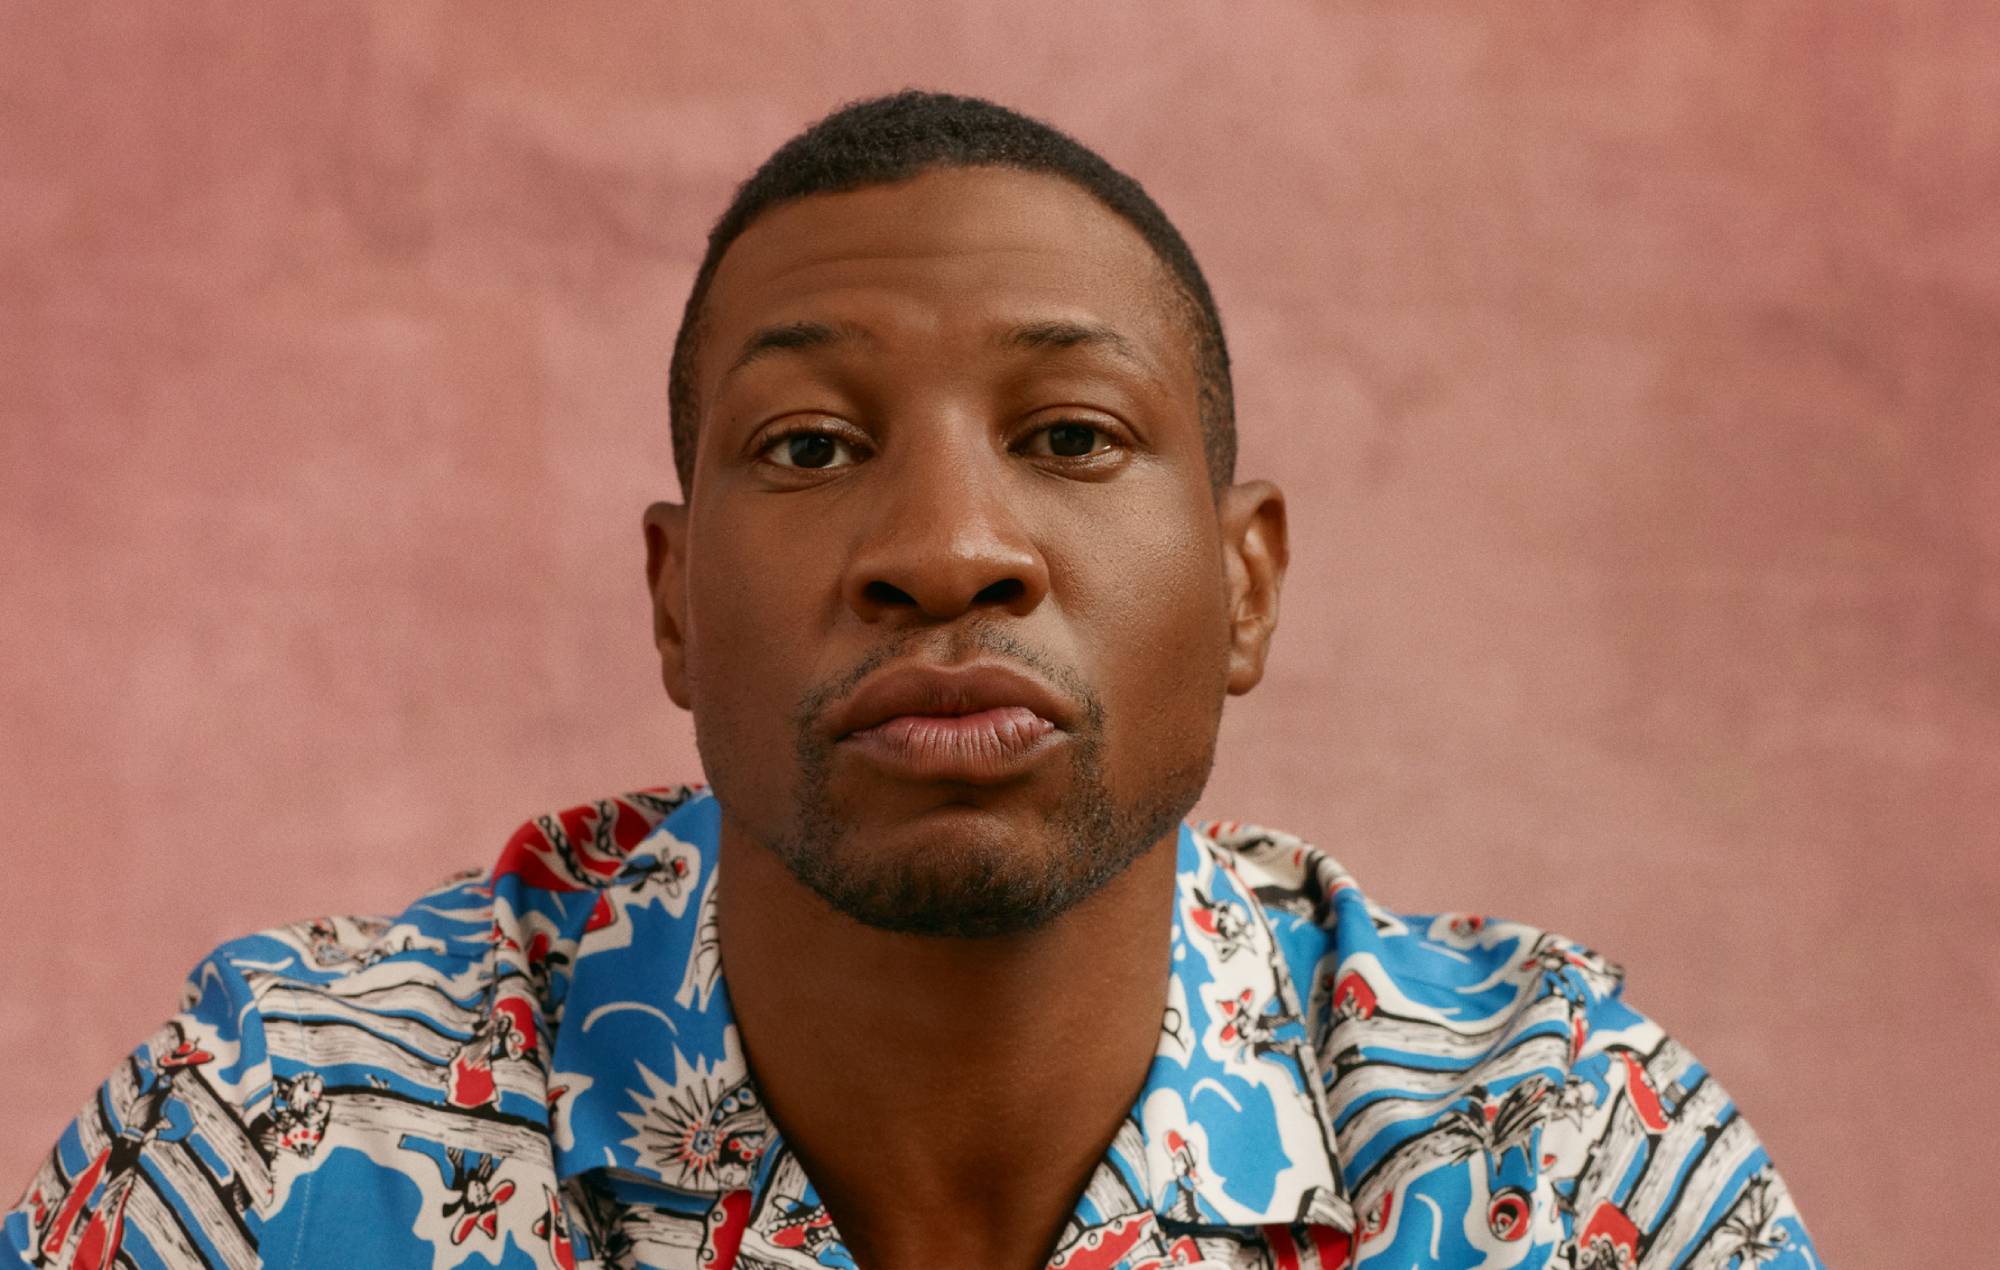 Jonathan Majors “I have an issue with authority"